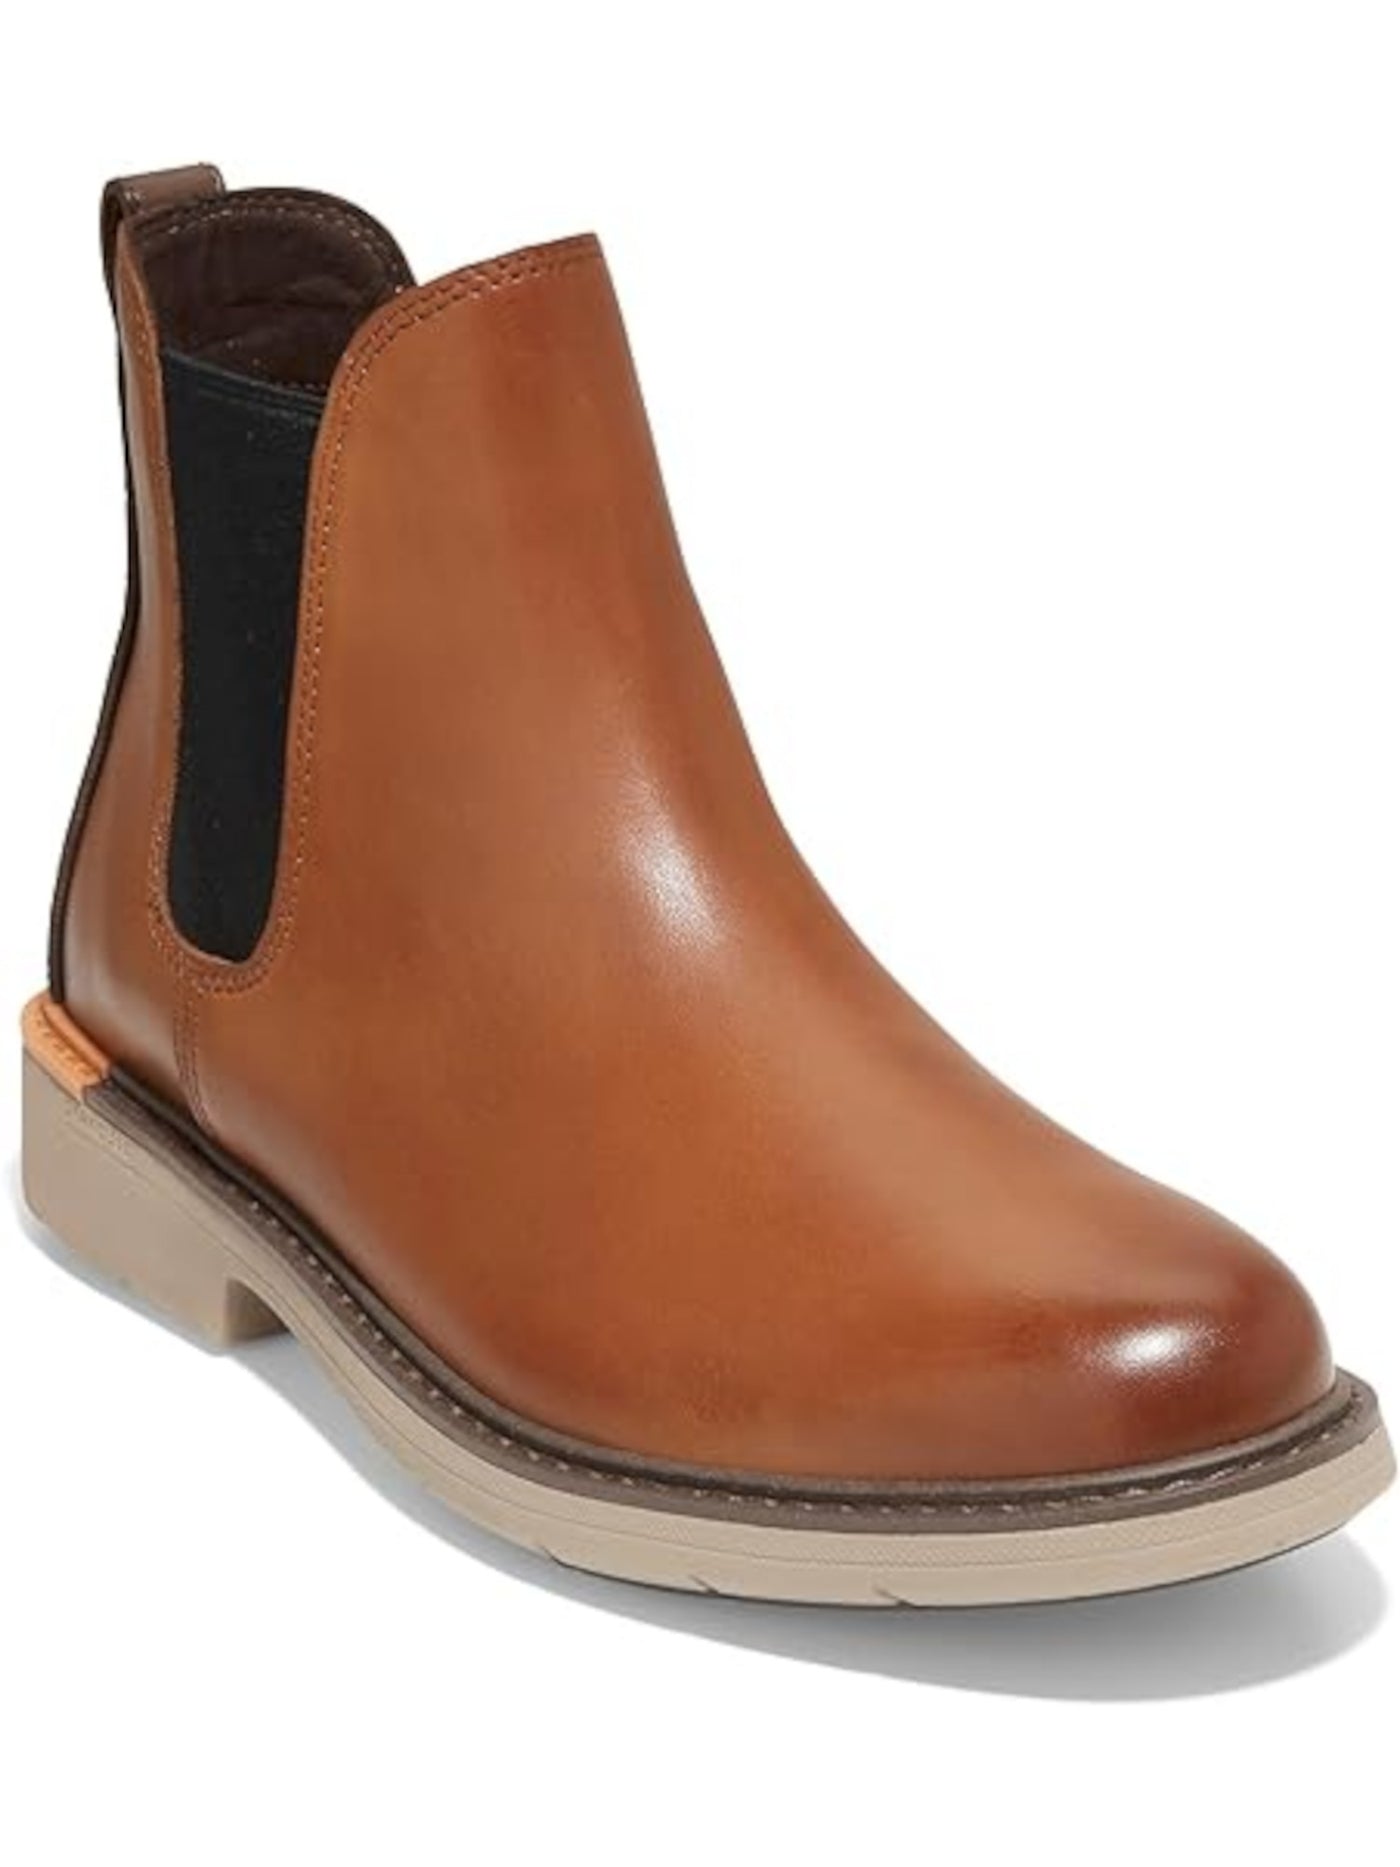 COLE HAAN GRANDSERIES Mens Brown Cushioned Go-to Round Toe Block Heel Leather Chelsea 9 M